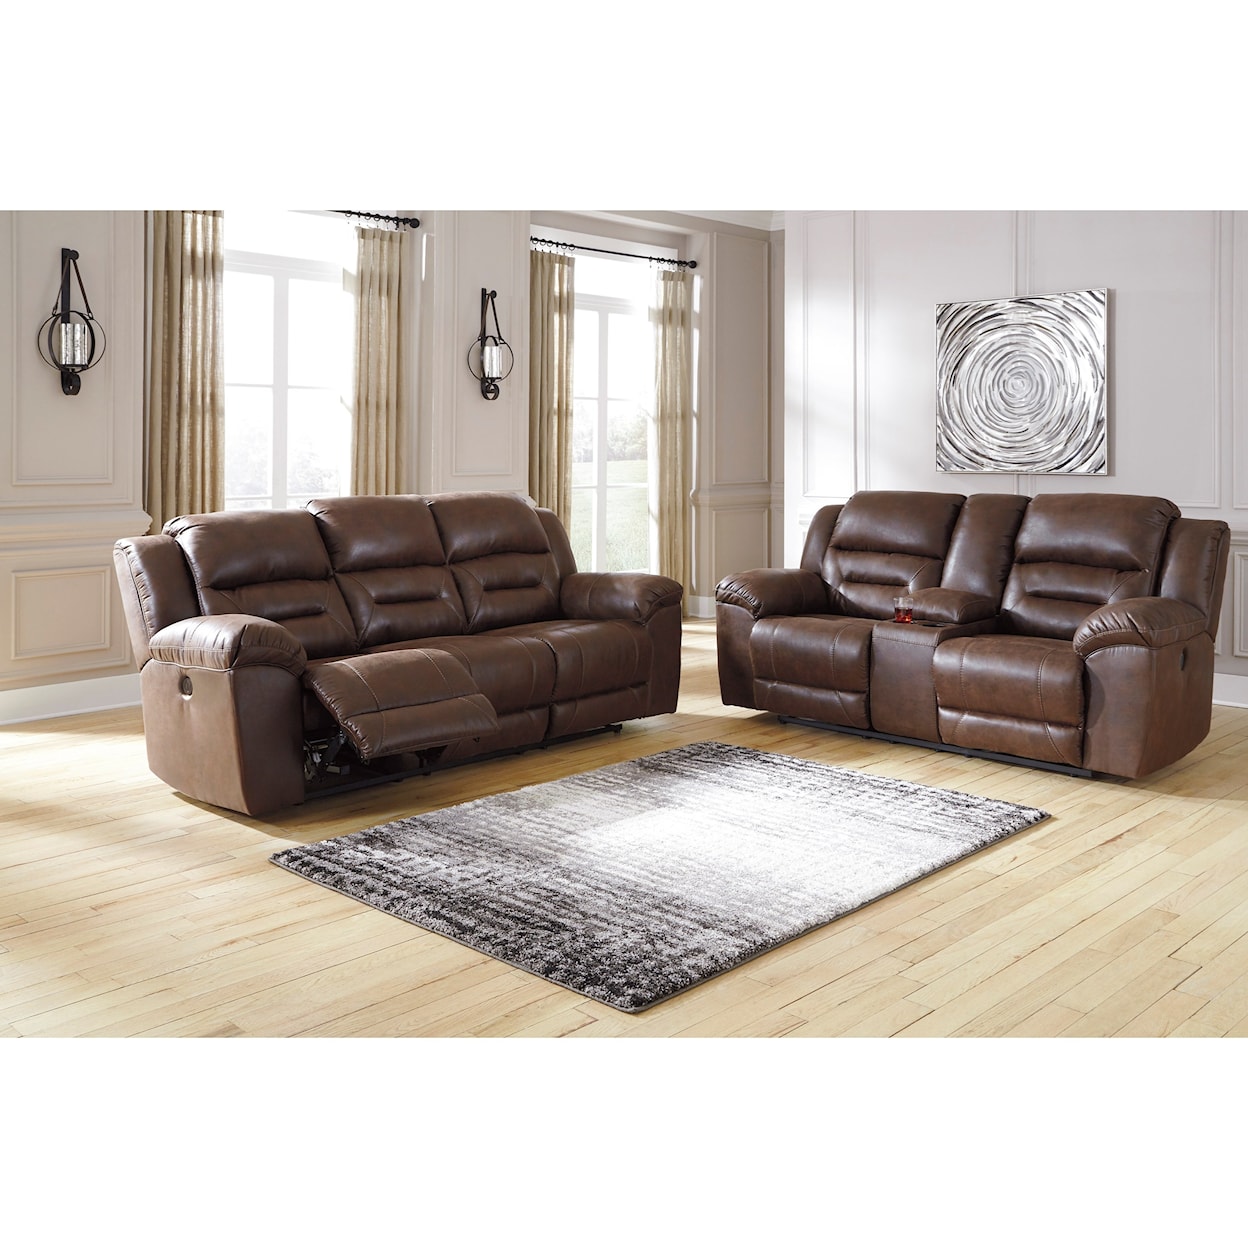 Michael Alan Select Stoneland Power Reclining Living Room Group